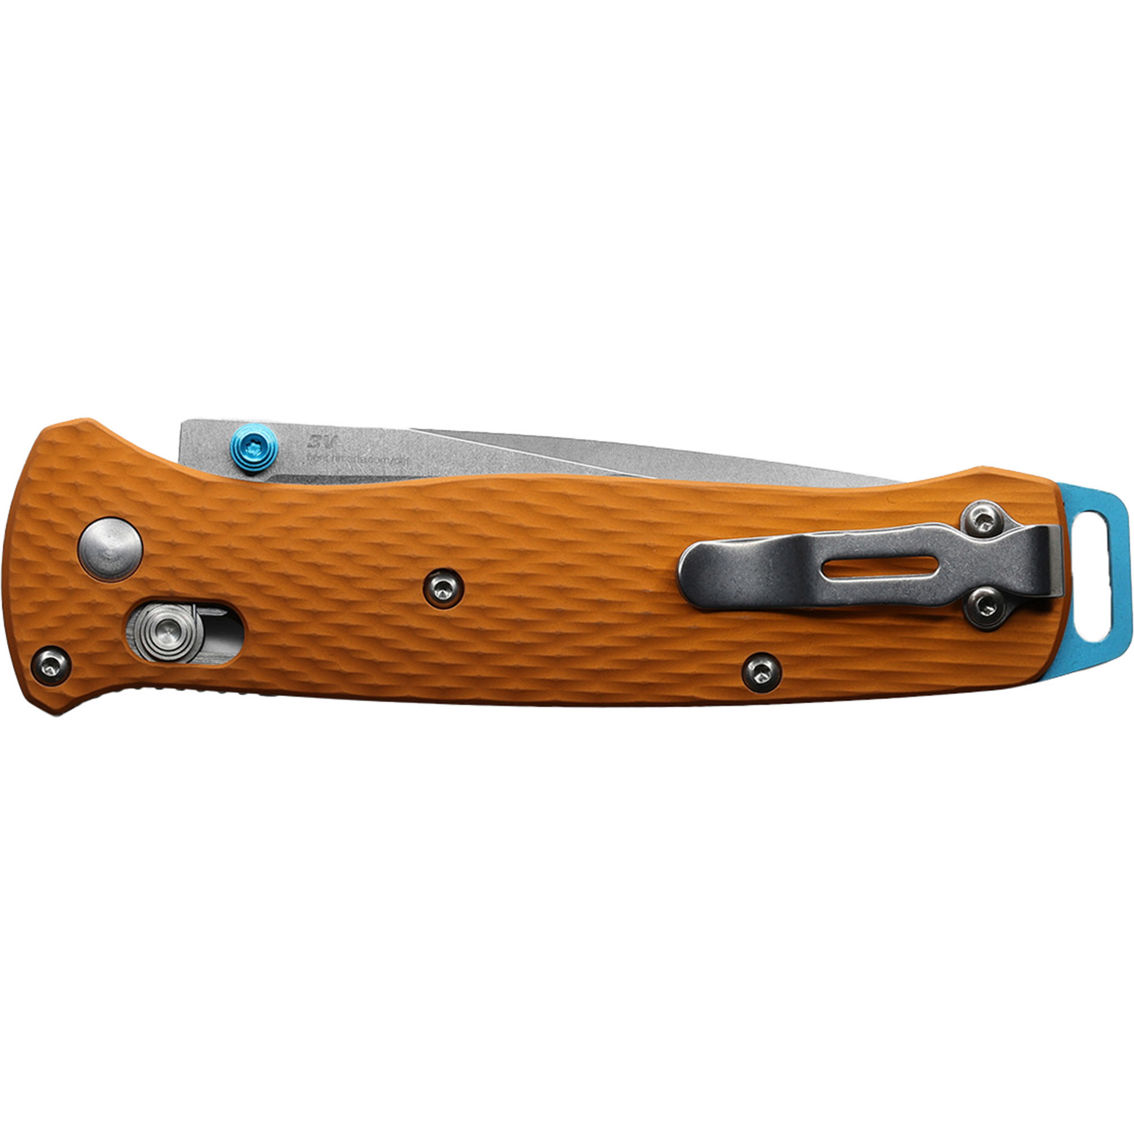 Benchmade 537-2301 Limited Edition Bailout Knife - Image 2 of 4